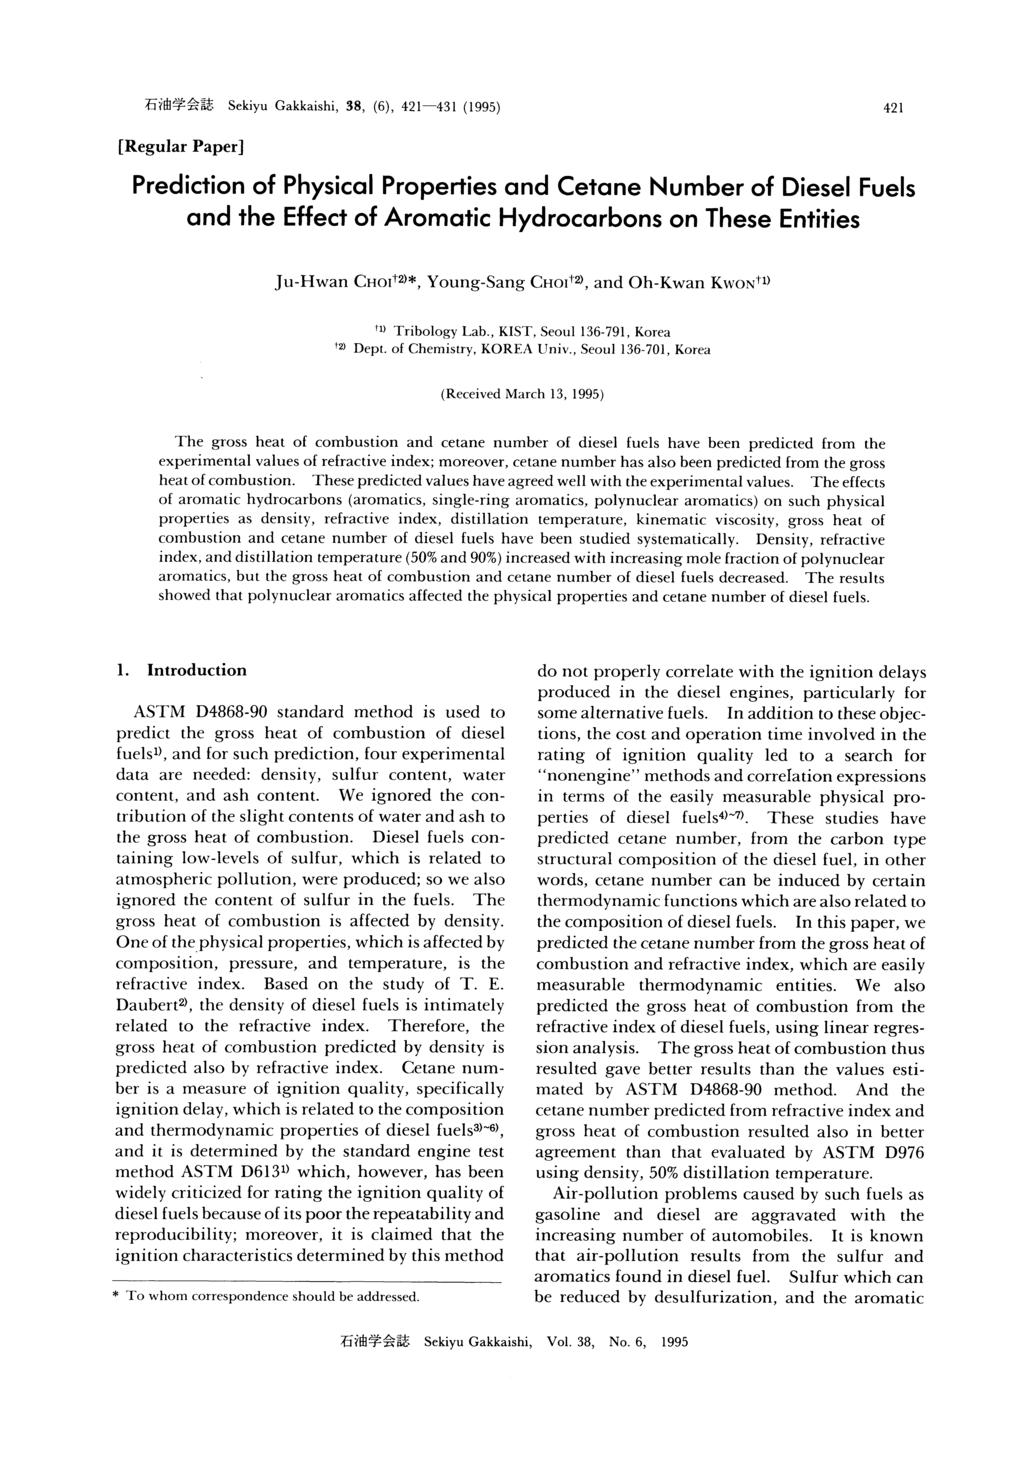 [Regular Paper] Prediction of Physical Properties and Cetane Number of Diesel Fuels and the Effect of Aromatic Hydrocarbons on These Entities (Received March 13, 1995) The gross heat of combustion